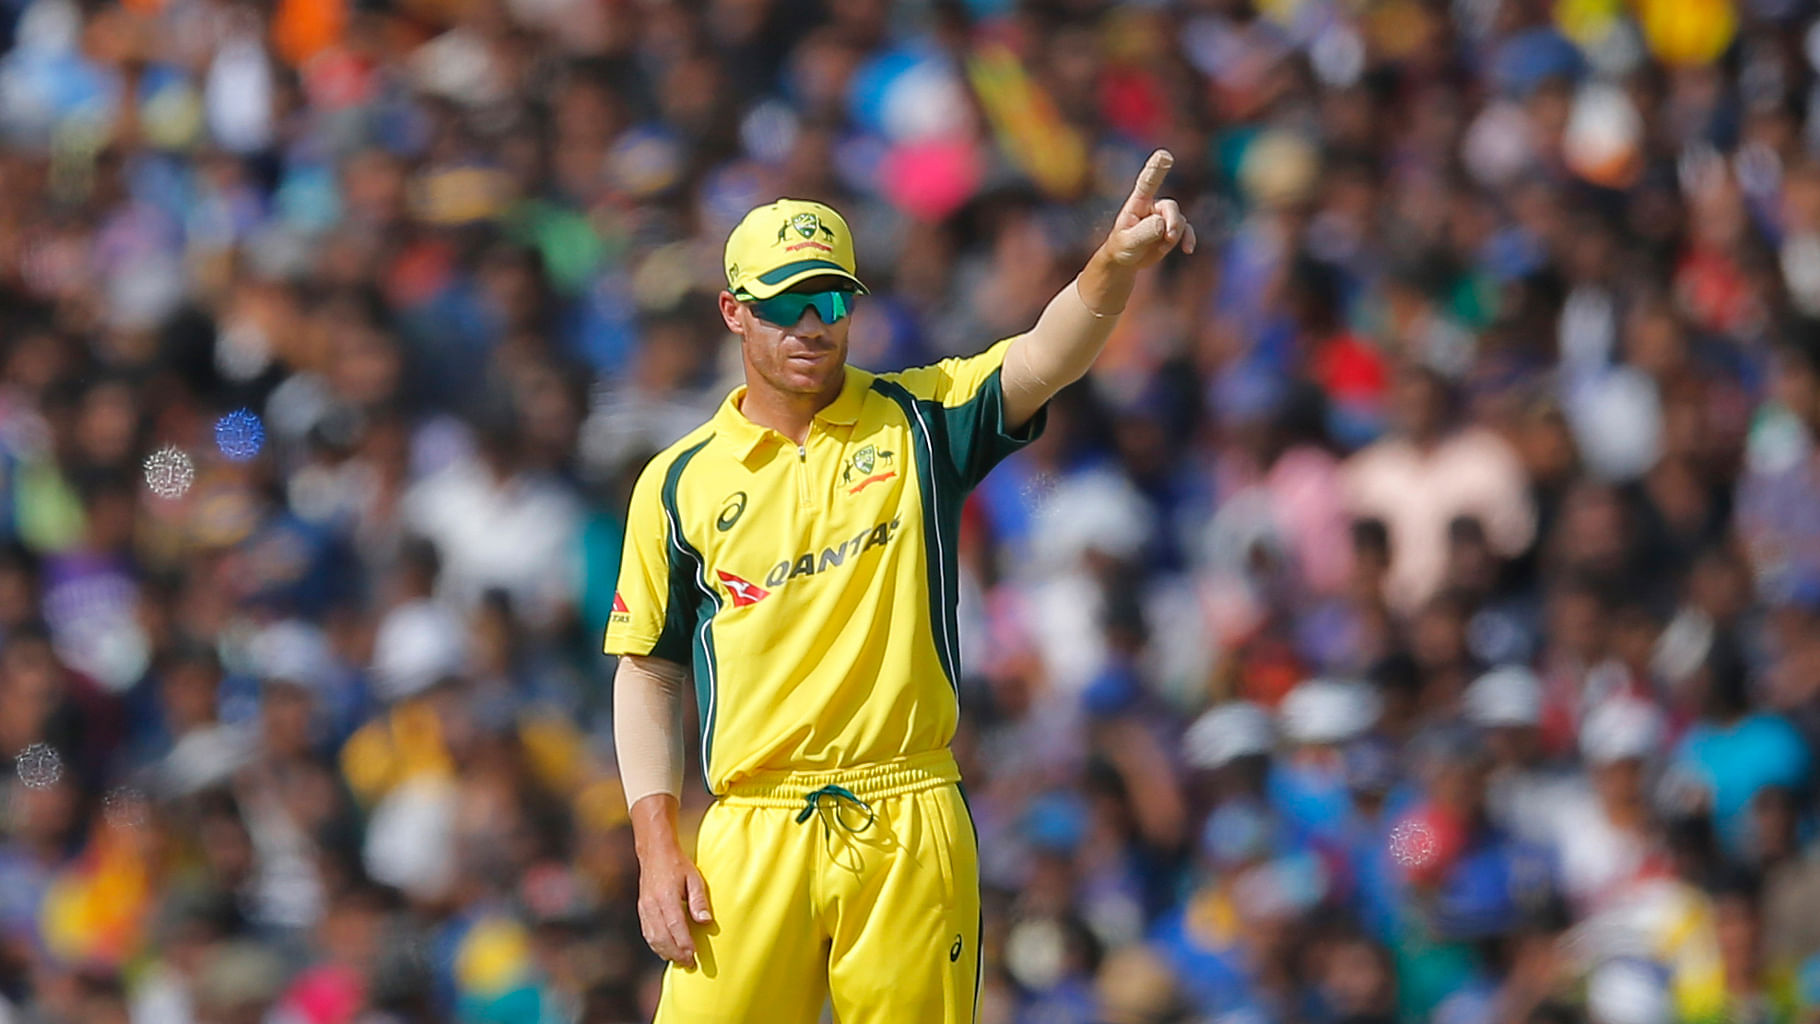  Graeme Smith believes David Warner’s behaviour needs to be monitored closely.